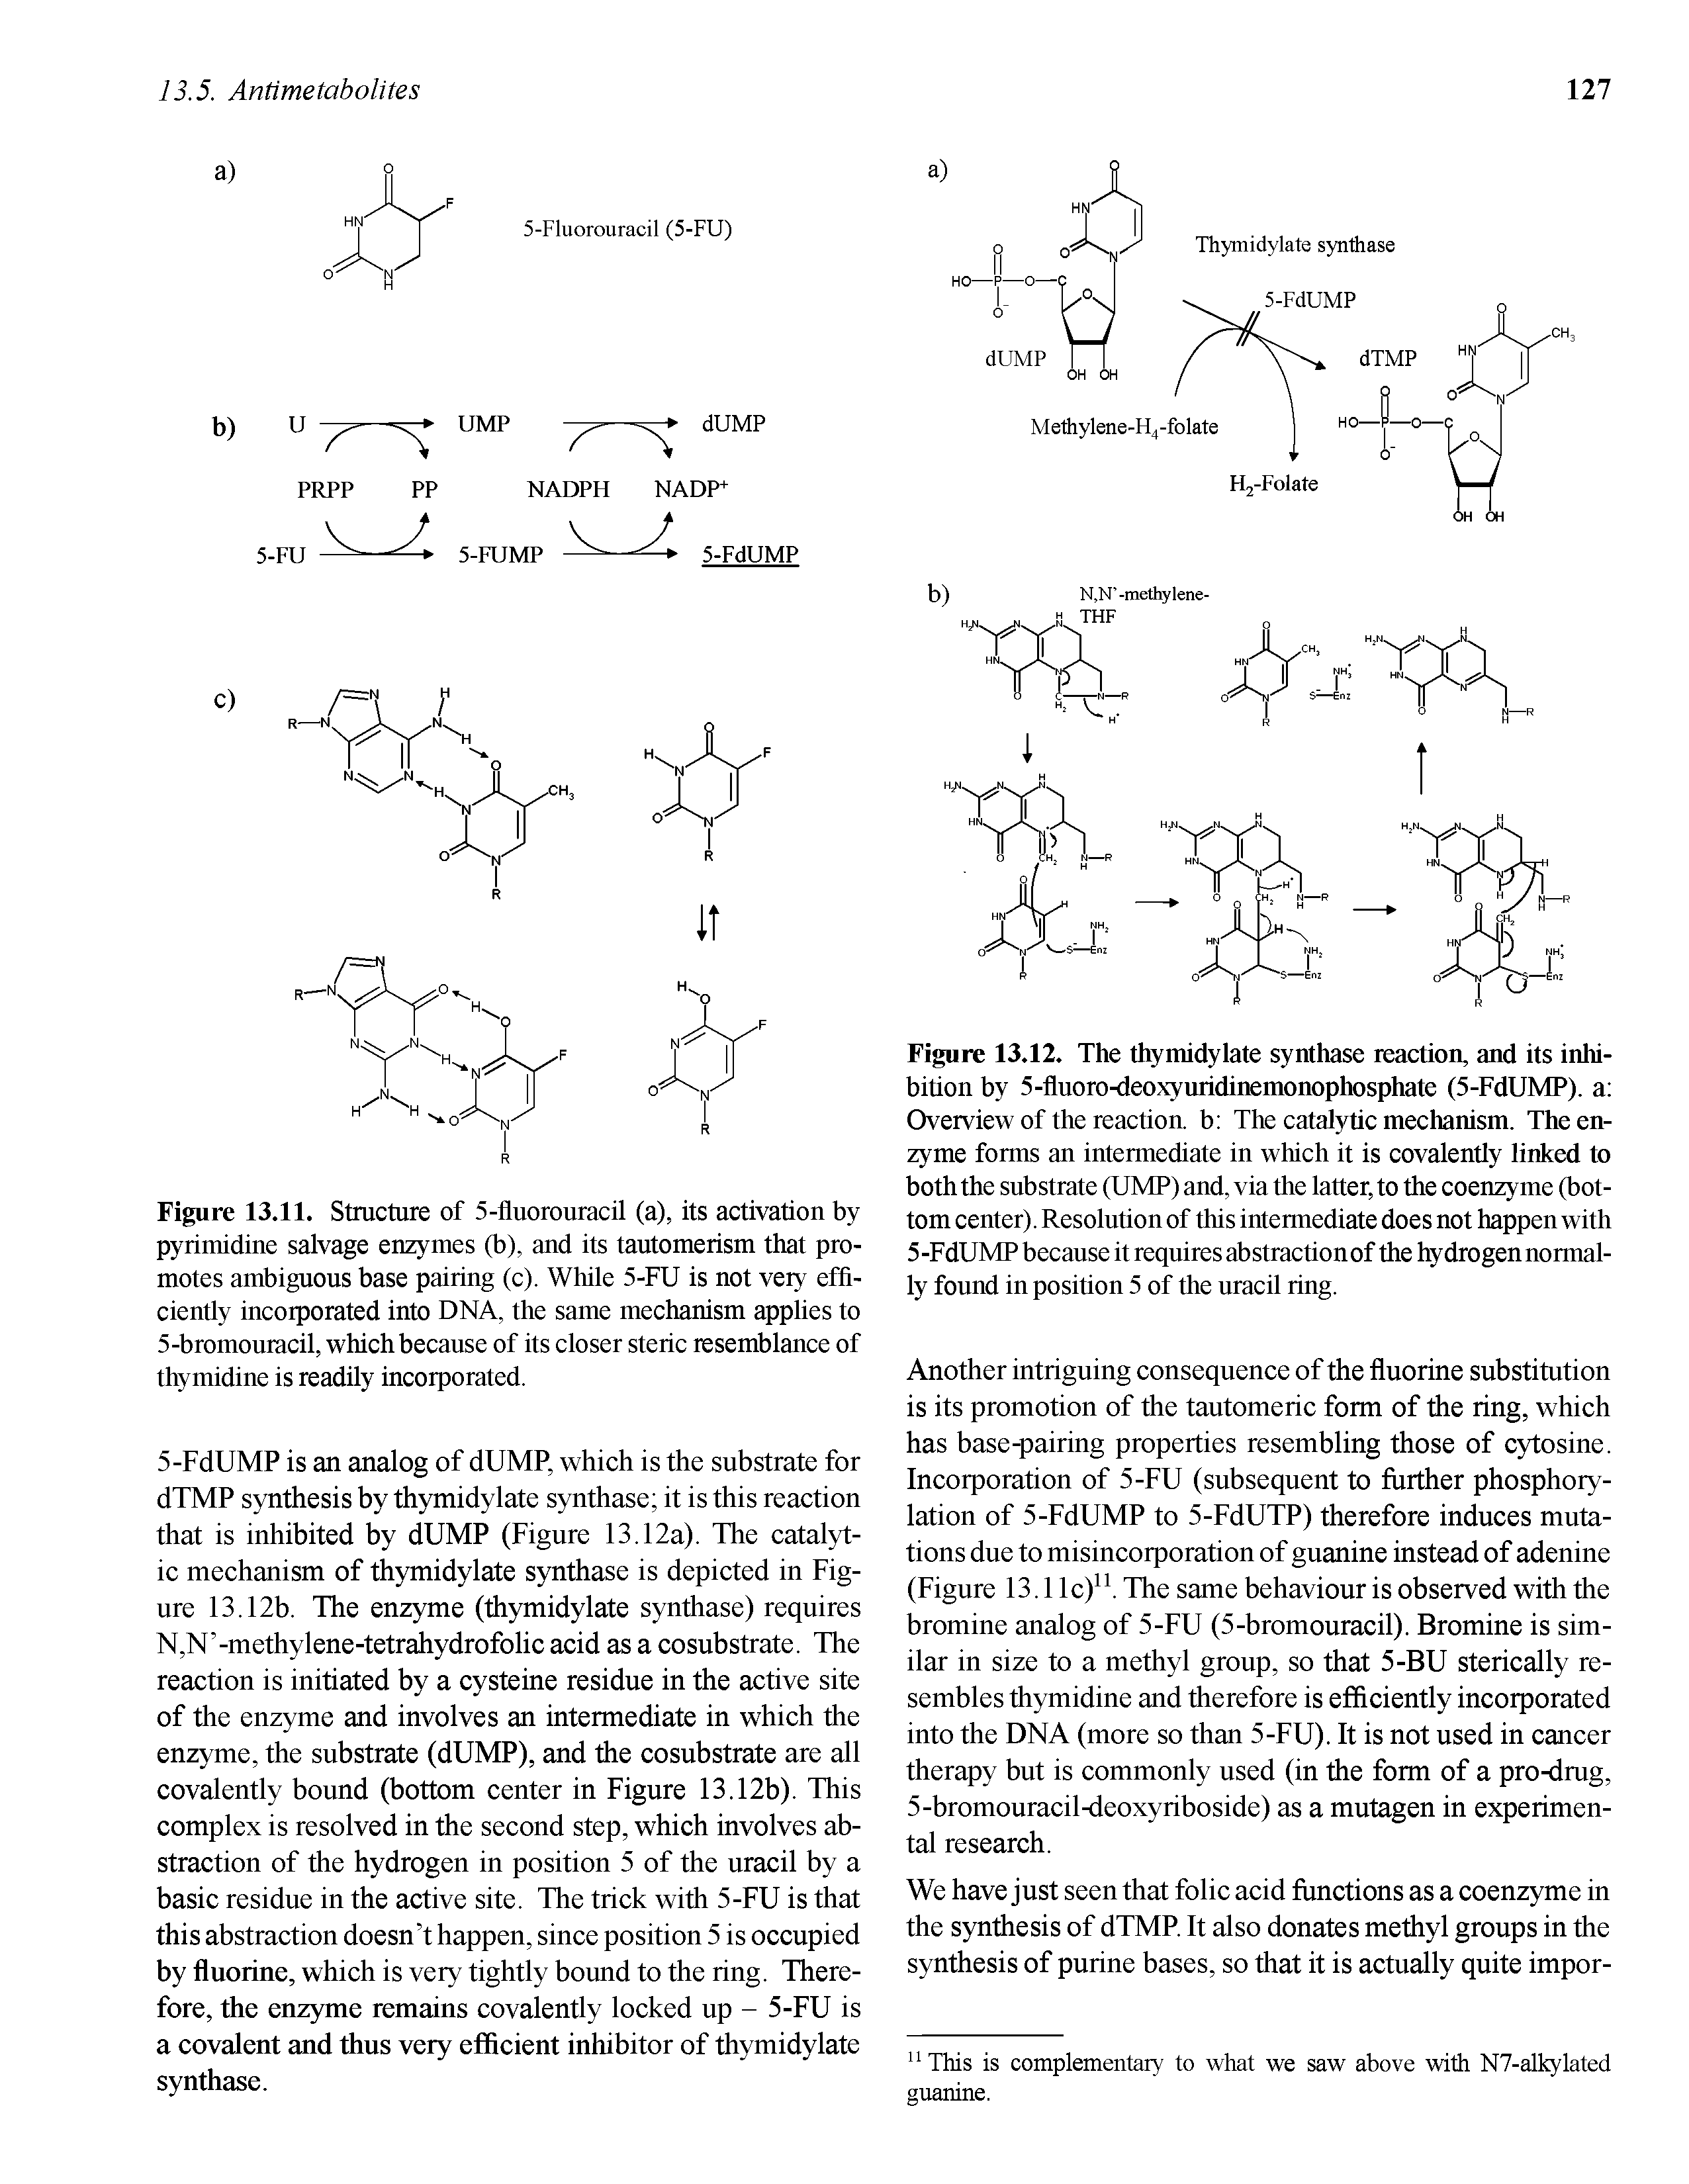 Figure 13.12. The thymidylate synthase reaction, and its inhibition by 5-fluoro-deoxyuridinemonophosphate (5-FdUMP). a Overview of the reaction, b The catalytic mechanism. The enzyme forms an intermediate in which it is covalently linked to both the substrate (UMP) and, via the latter, to the coenzyme (bottom center). Resolution of this intermediate does not happen with 5-FdUMP because it requires abstractionof the hydrogen normally found in position 5 of the uracil ring.